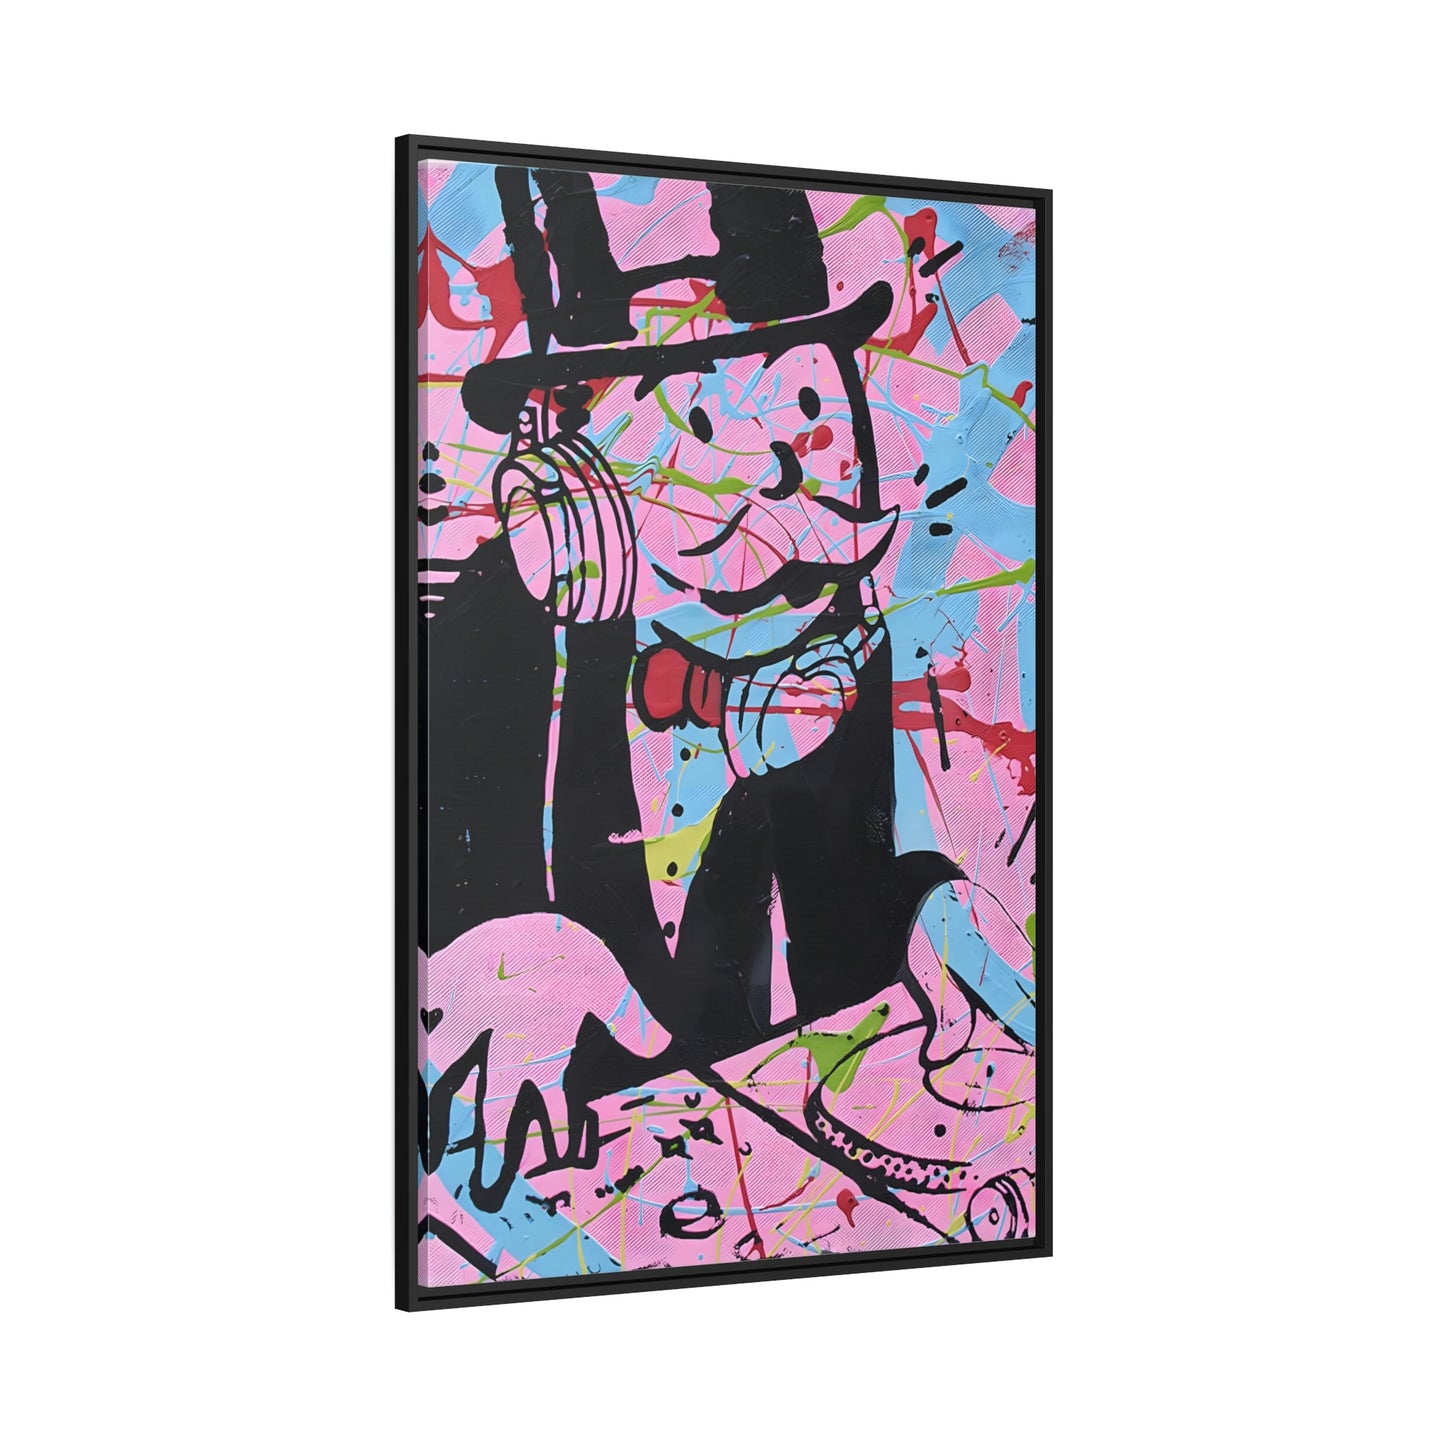 Pop Art Icon: Eye-Catching Wall Art Prints of Alec Monopoly's Iconic Graffiti Style on Natural Canva